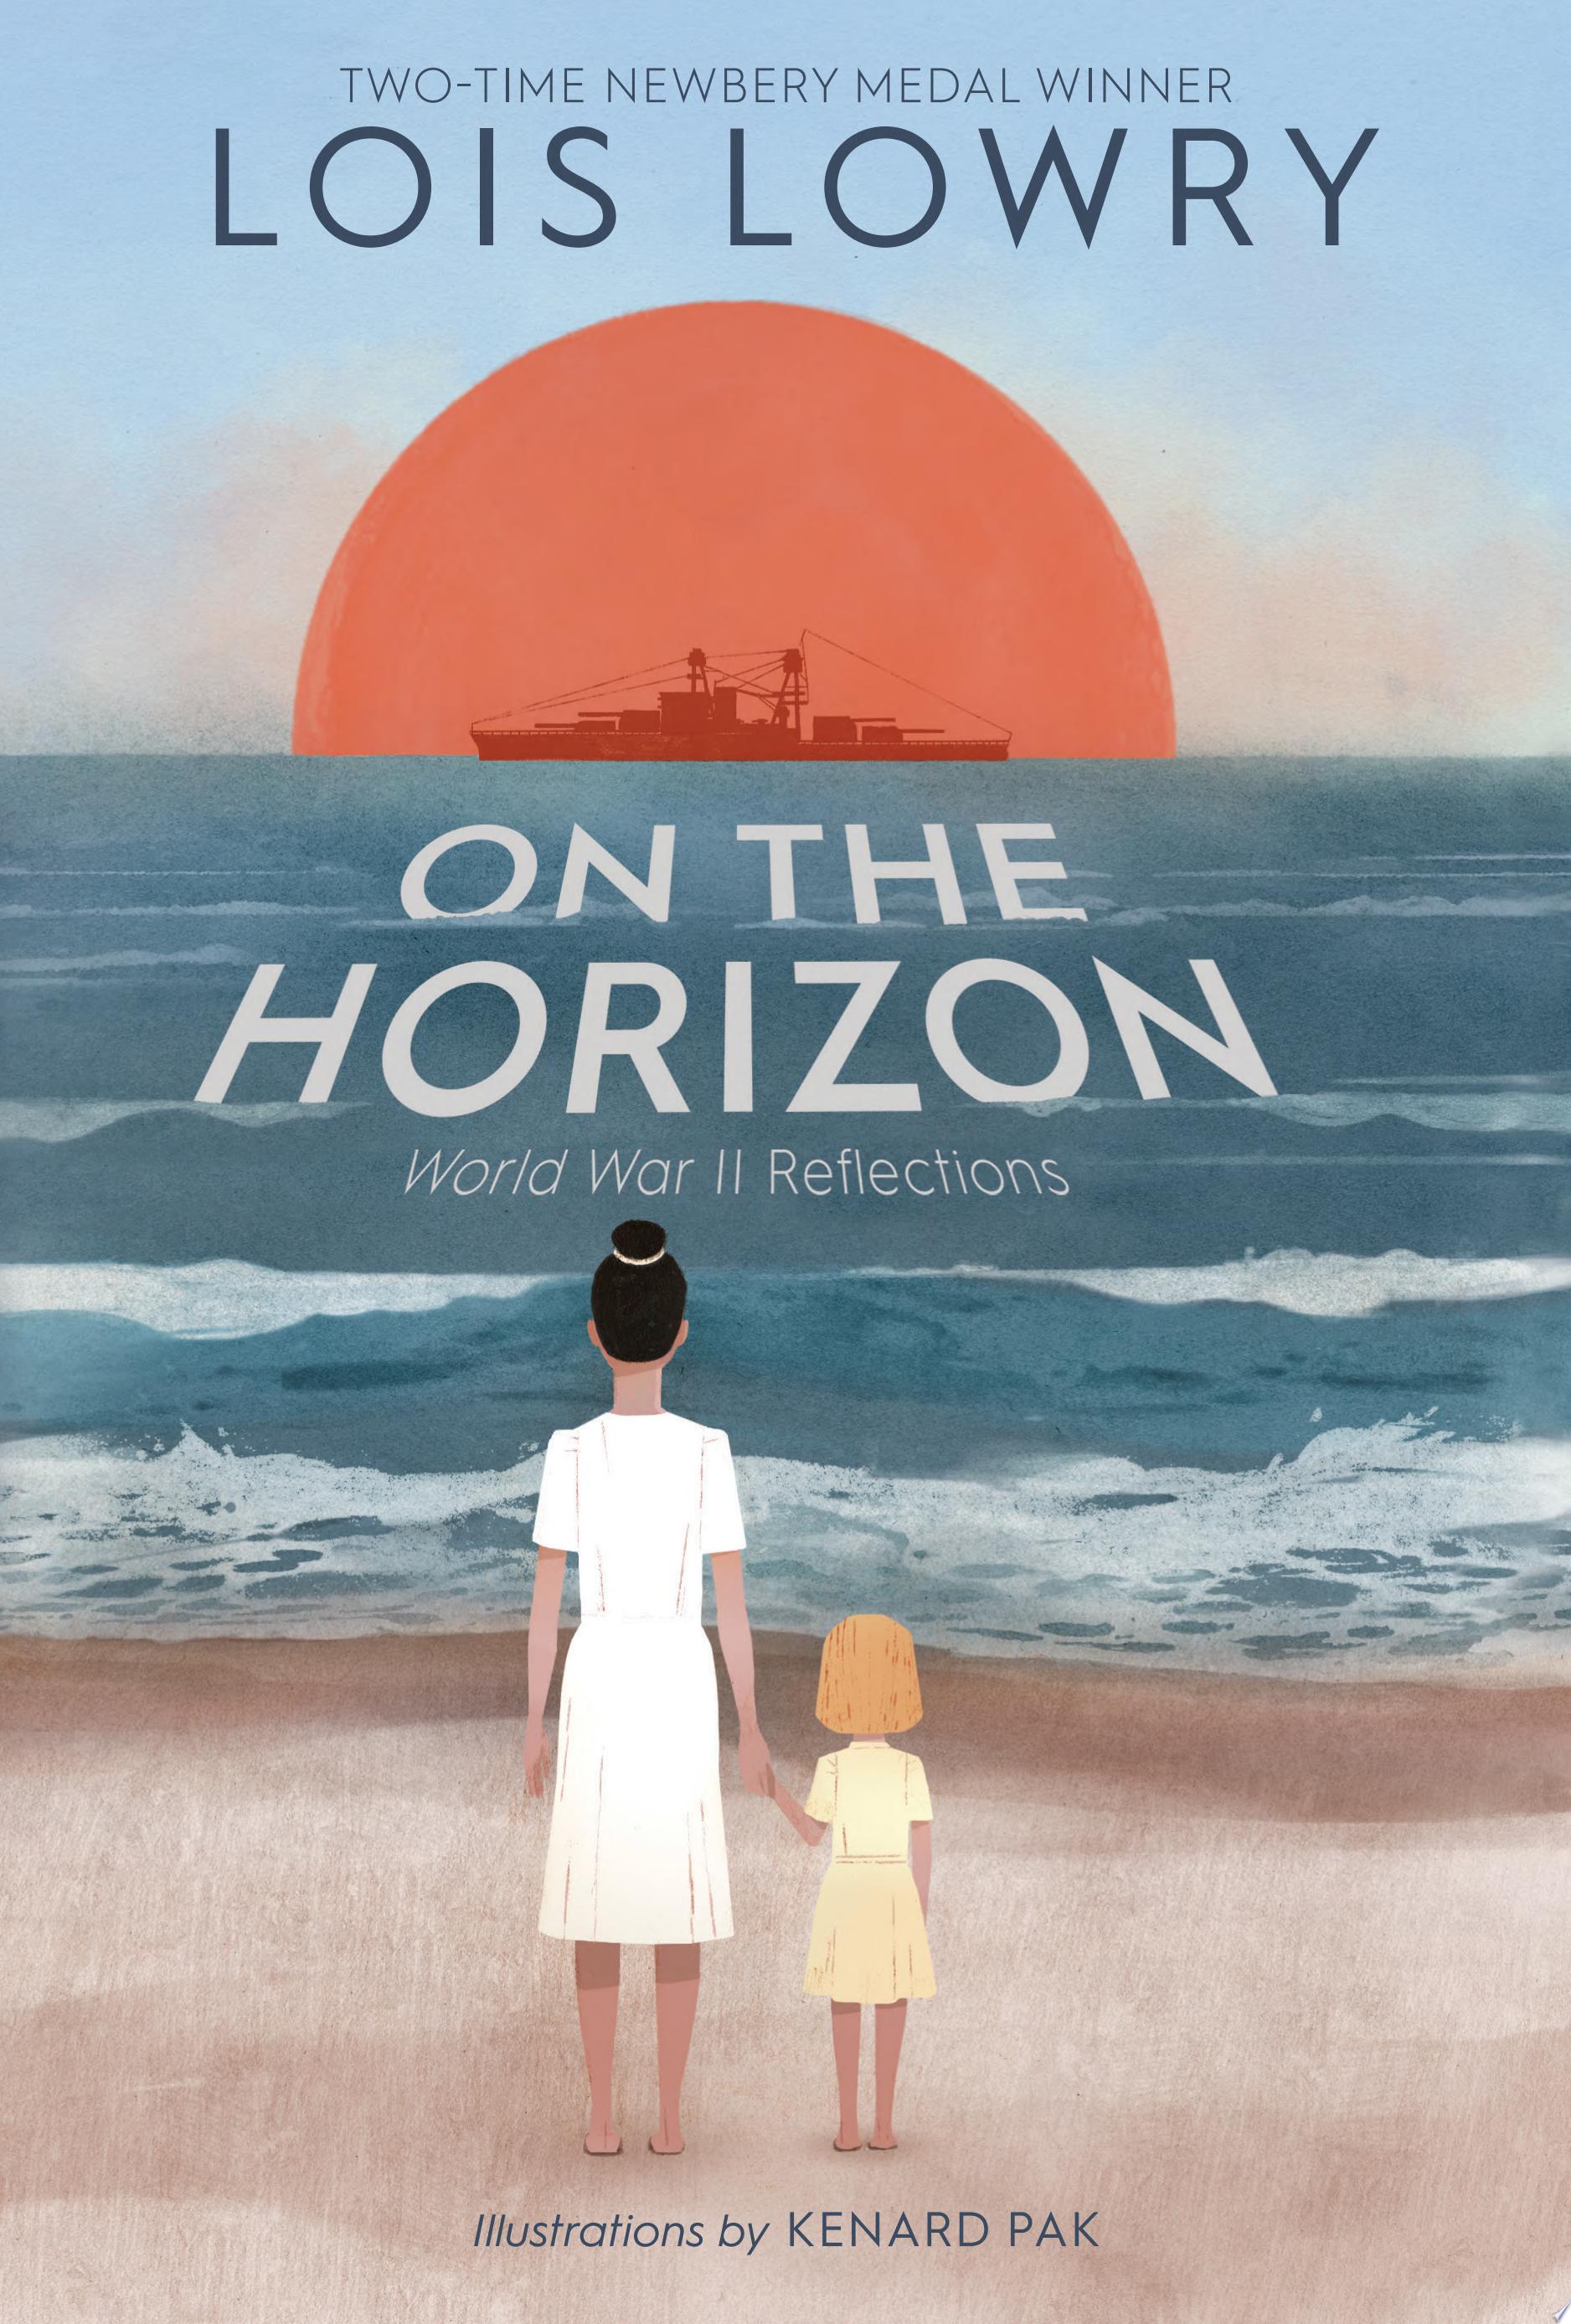 Image for "On the Horizon"